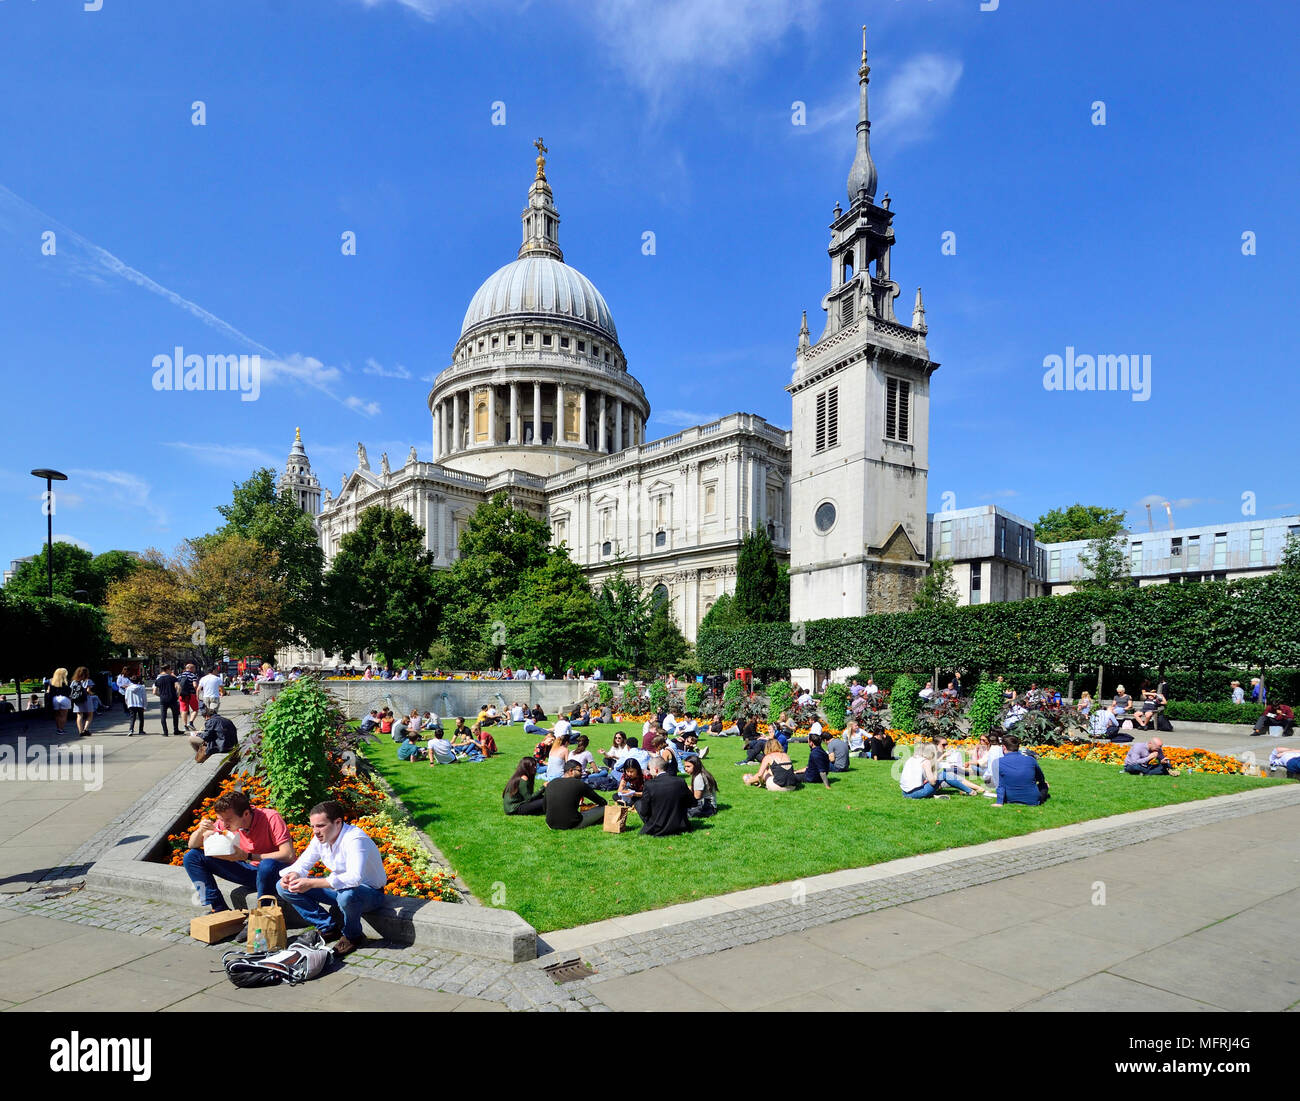 London, England, UK. People relaxing at lunchtime in Festival Gardens by St Paul's Cathedral. Tower of St Paul's Cathedral School (R) Stock Photo